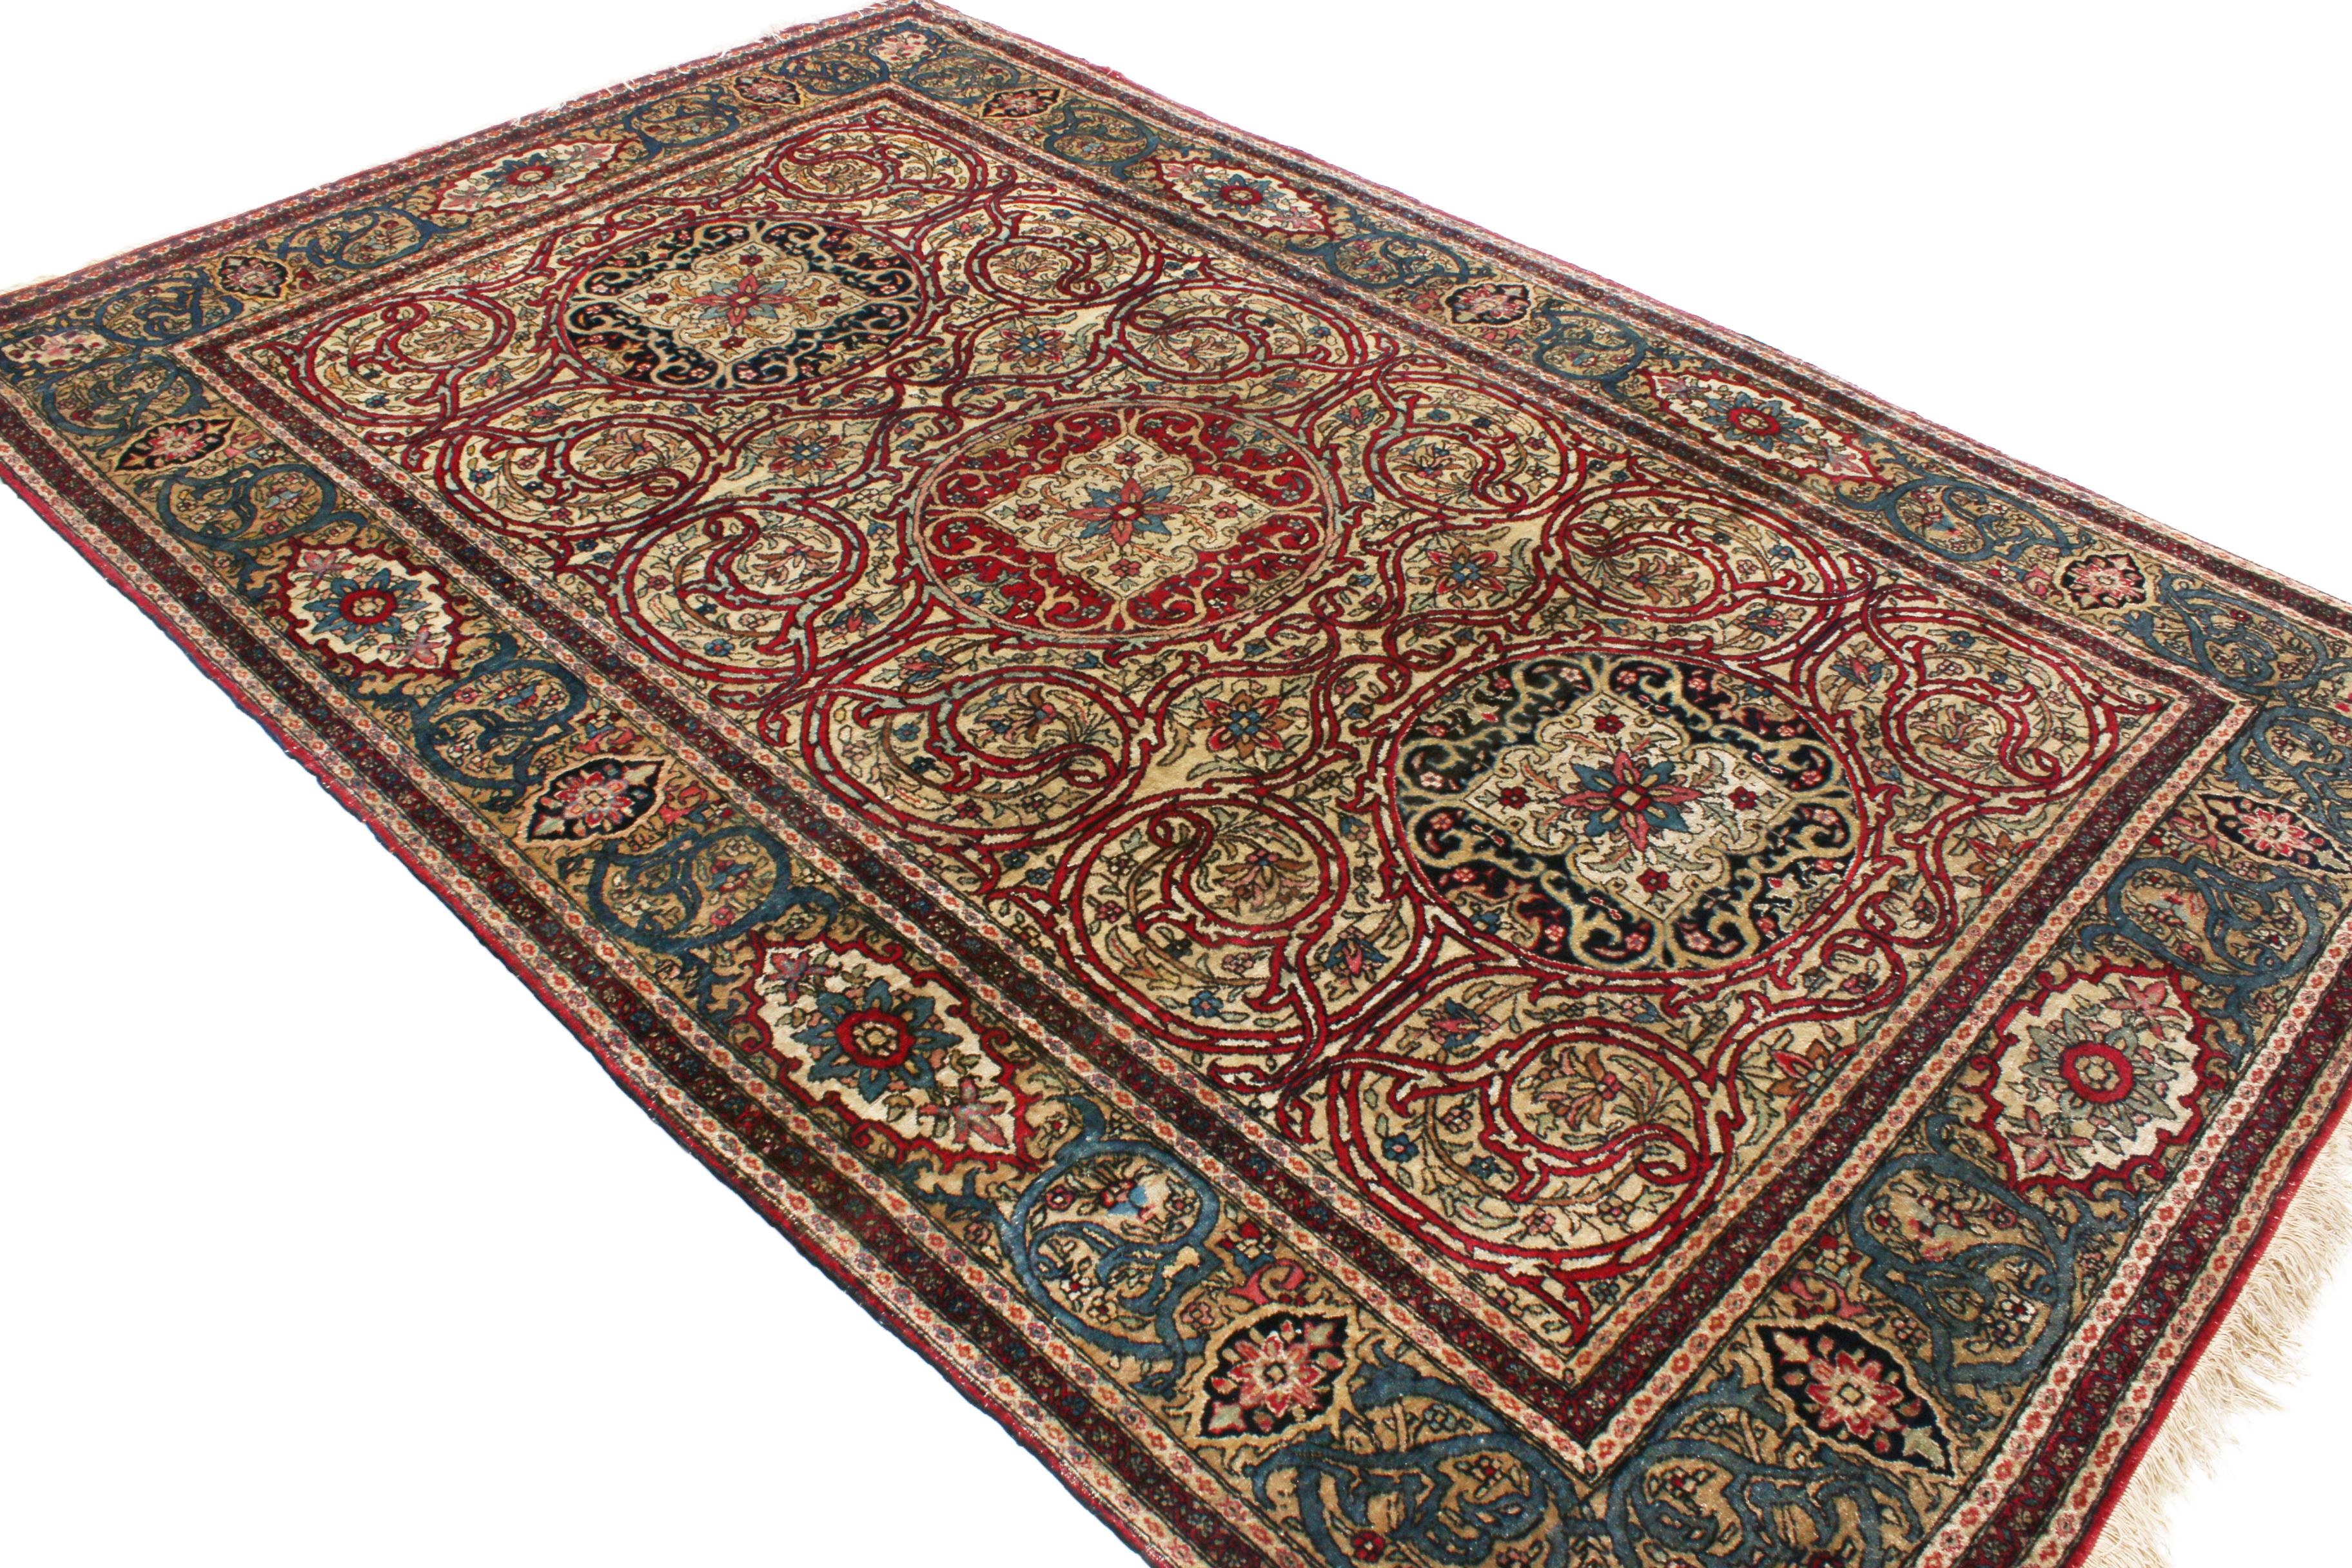 Originating from Persia between 1890-1910, this hand knotted Isfahan piece enjoys one of the most unique interpretations of the Islimi vine scroll of any Persian rug, lending a unique dimensionality to the field with the richest burgundy colourways